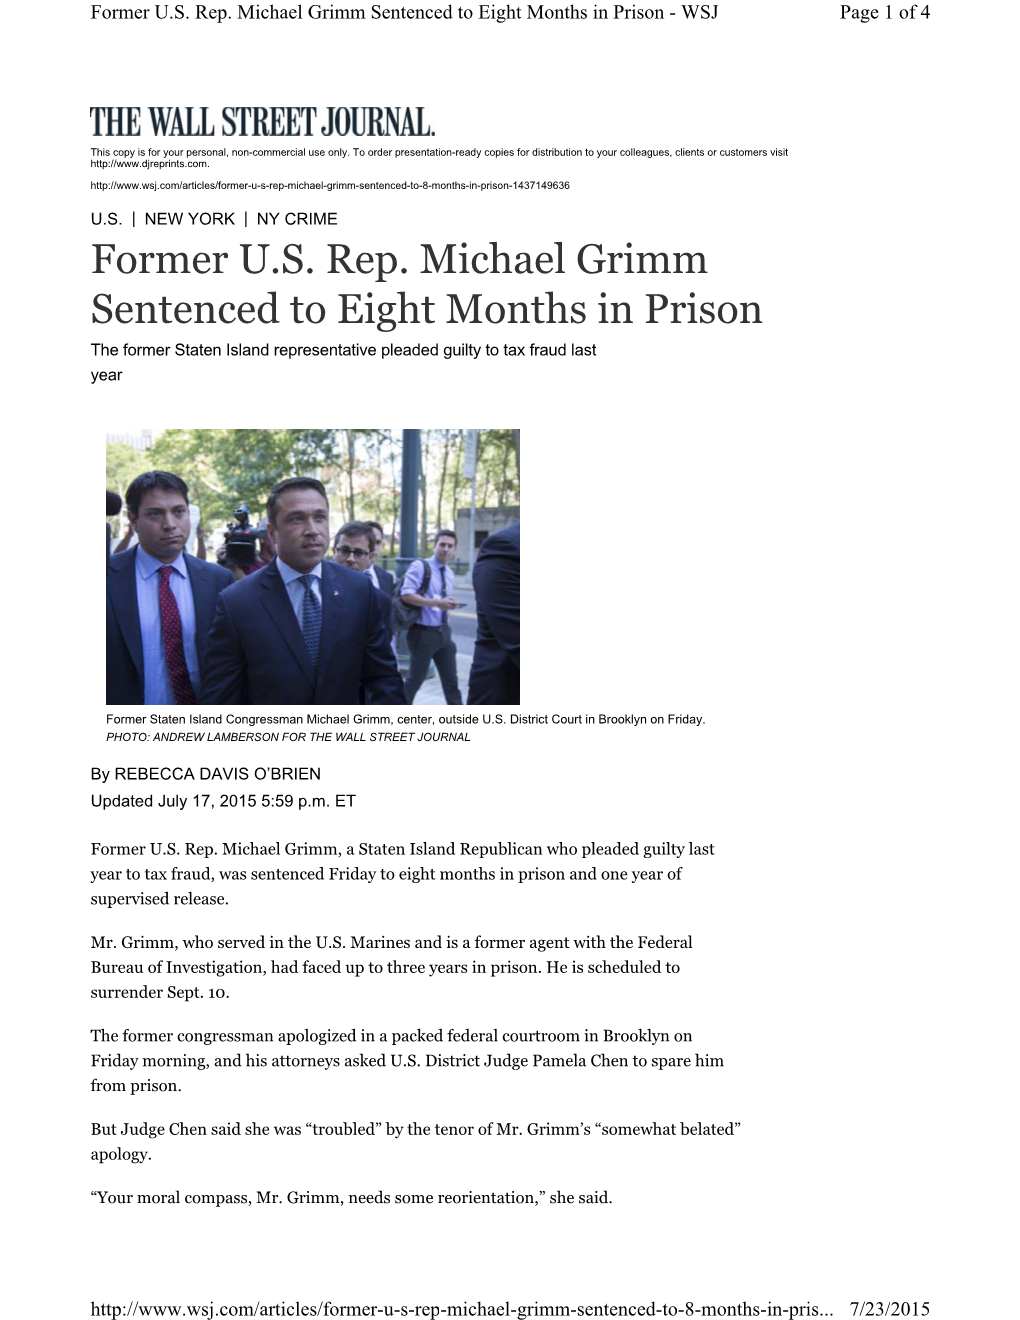 Former U.S. Rep. Michael Grimm Sentenced to Eight Months in Prison - WSJ Page 1 of 4